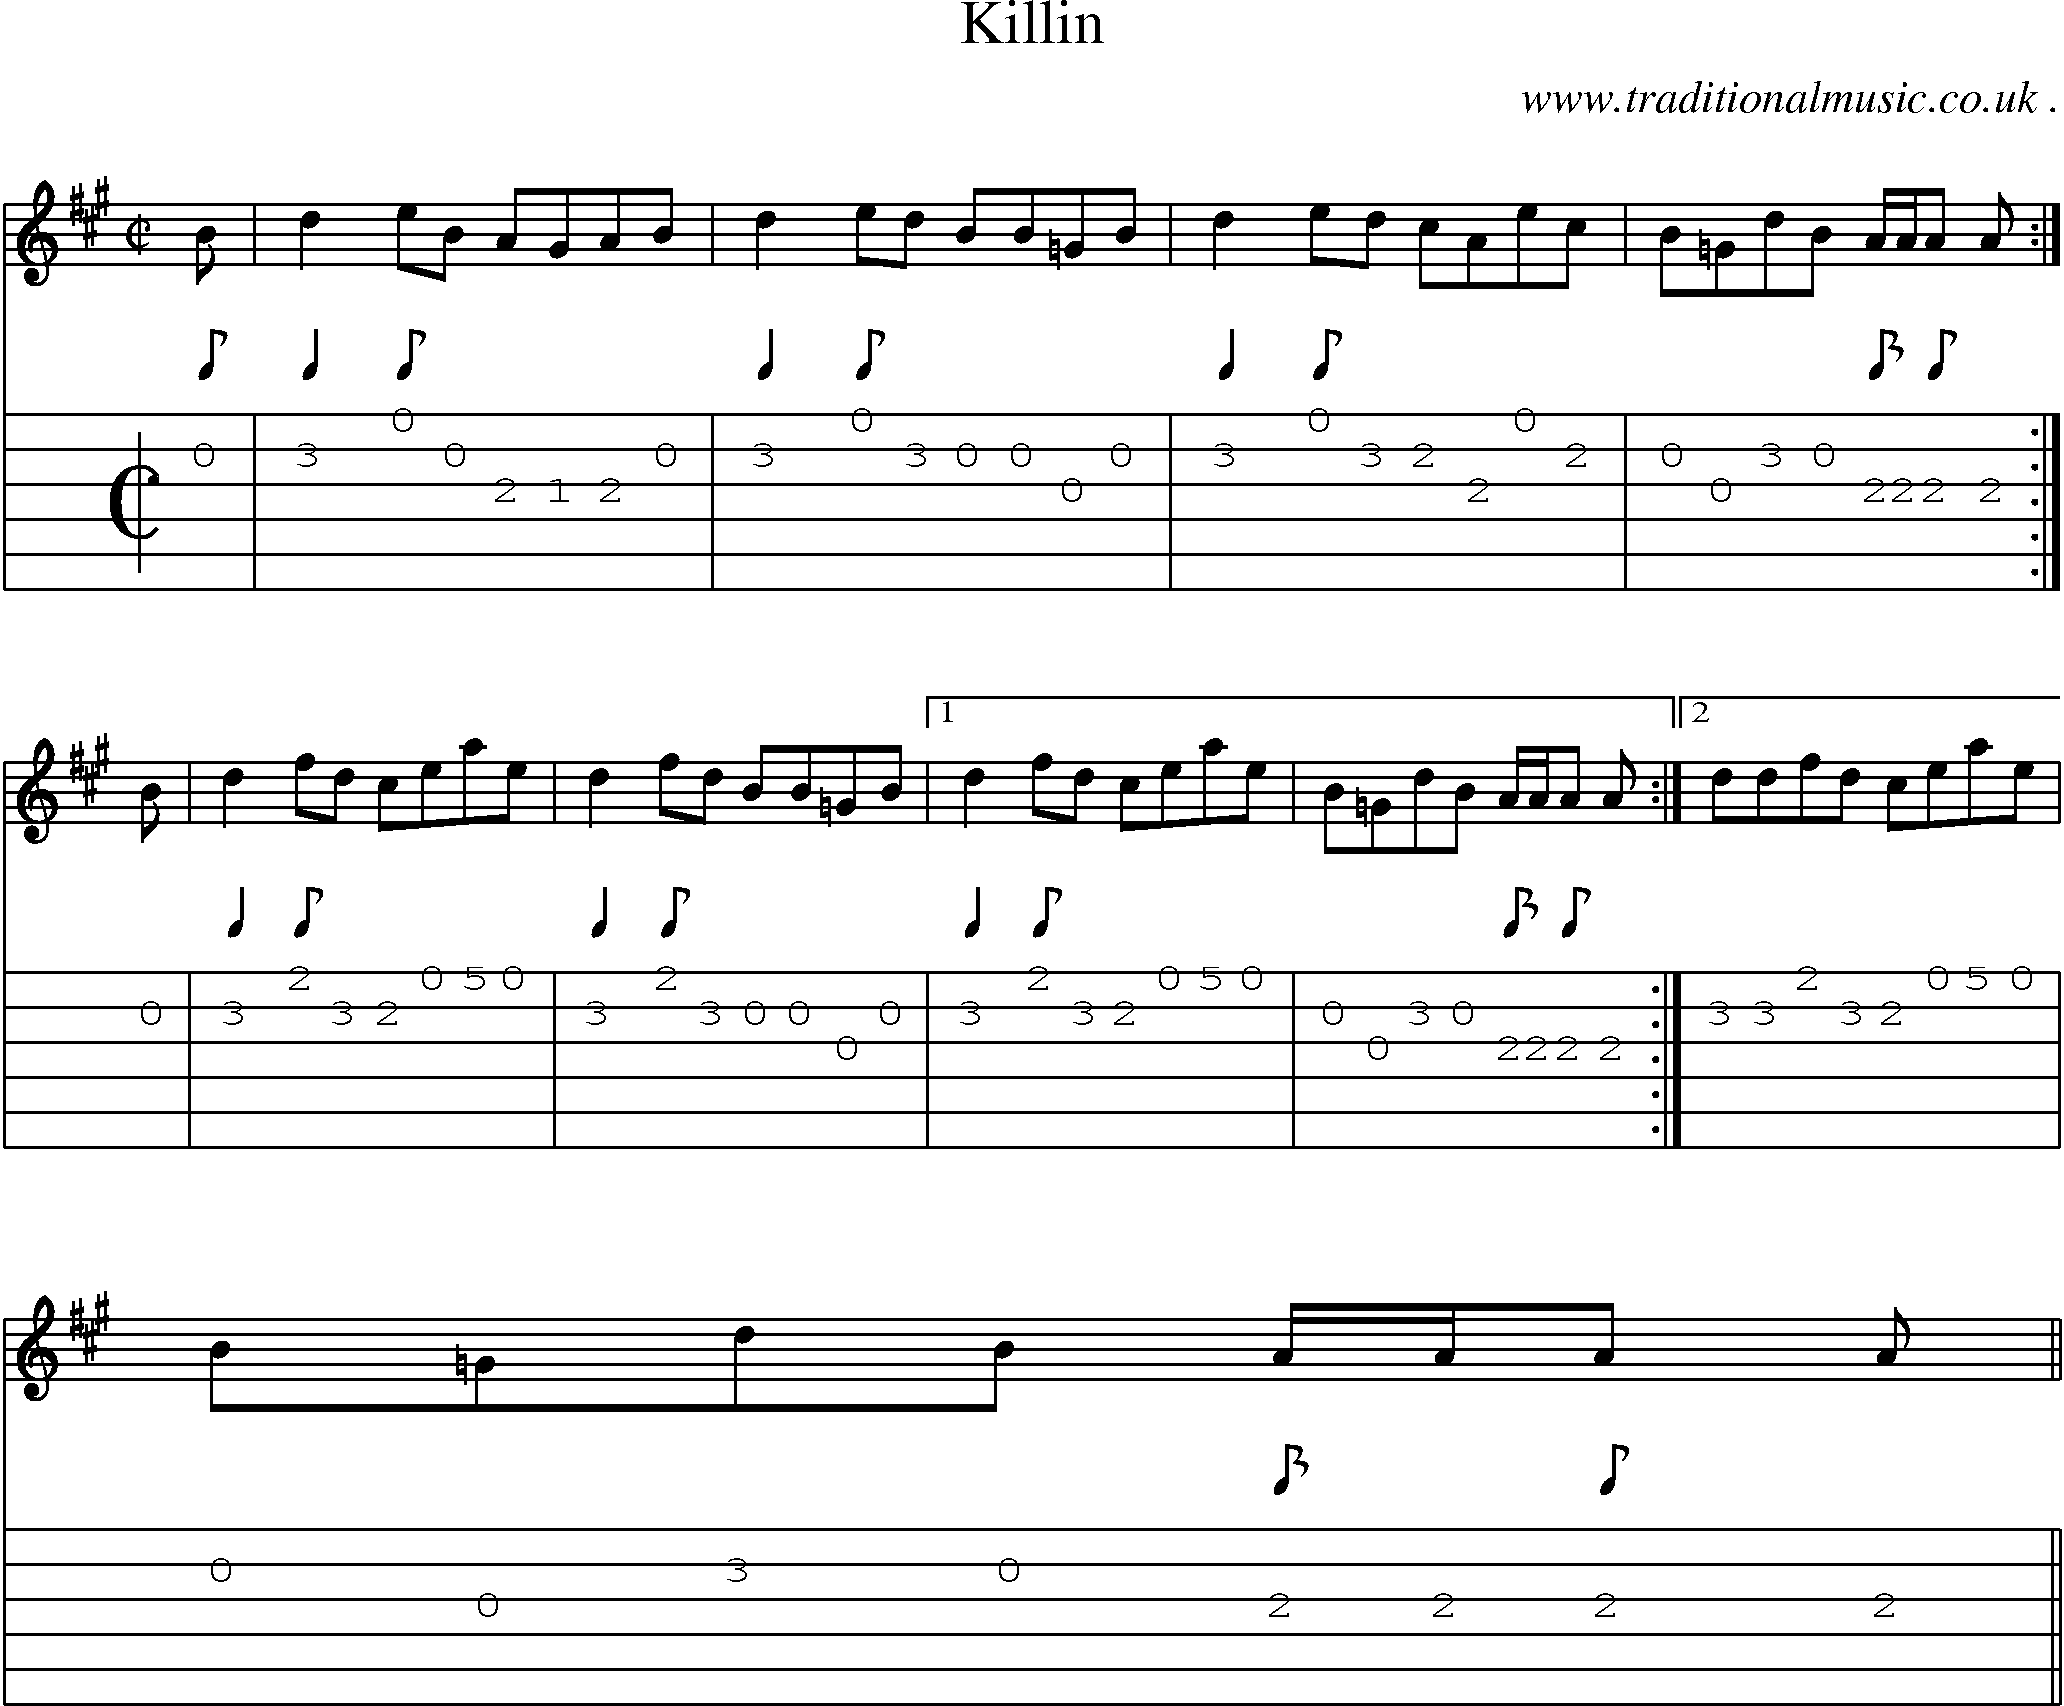 Sheet-music  score, Chords and Guitar Tabs for Killin